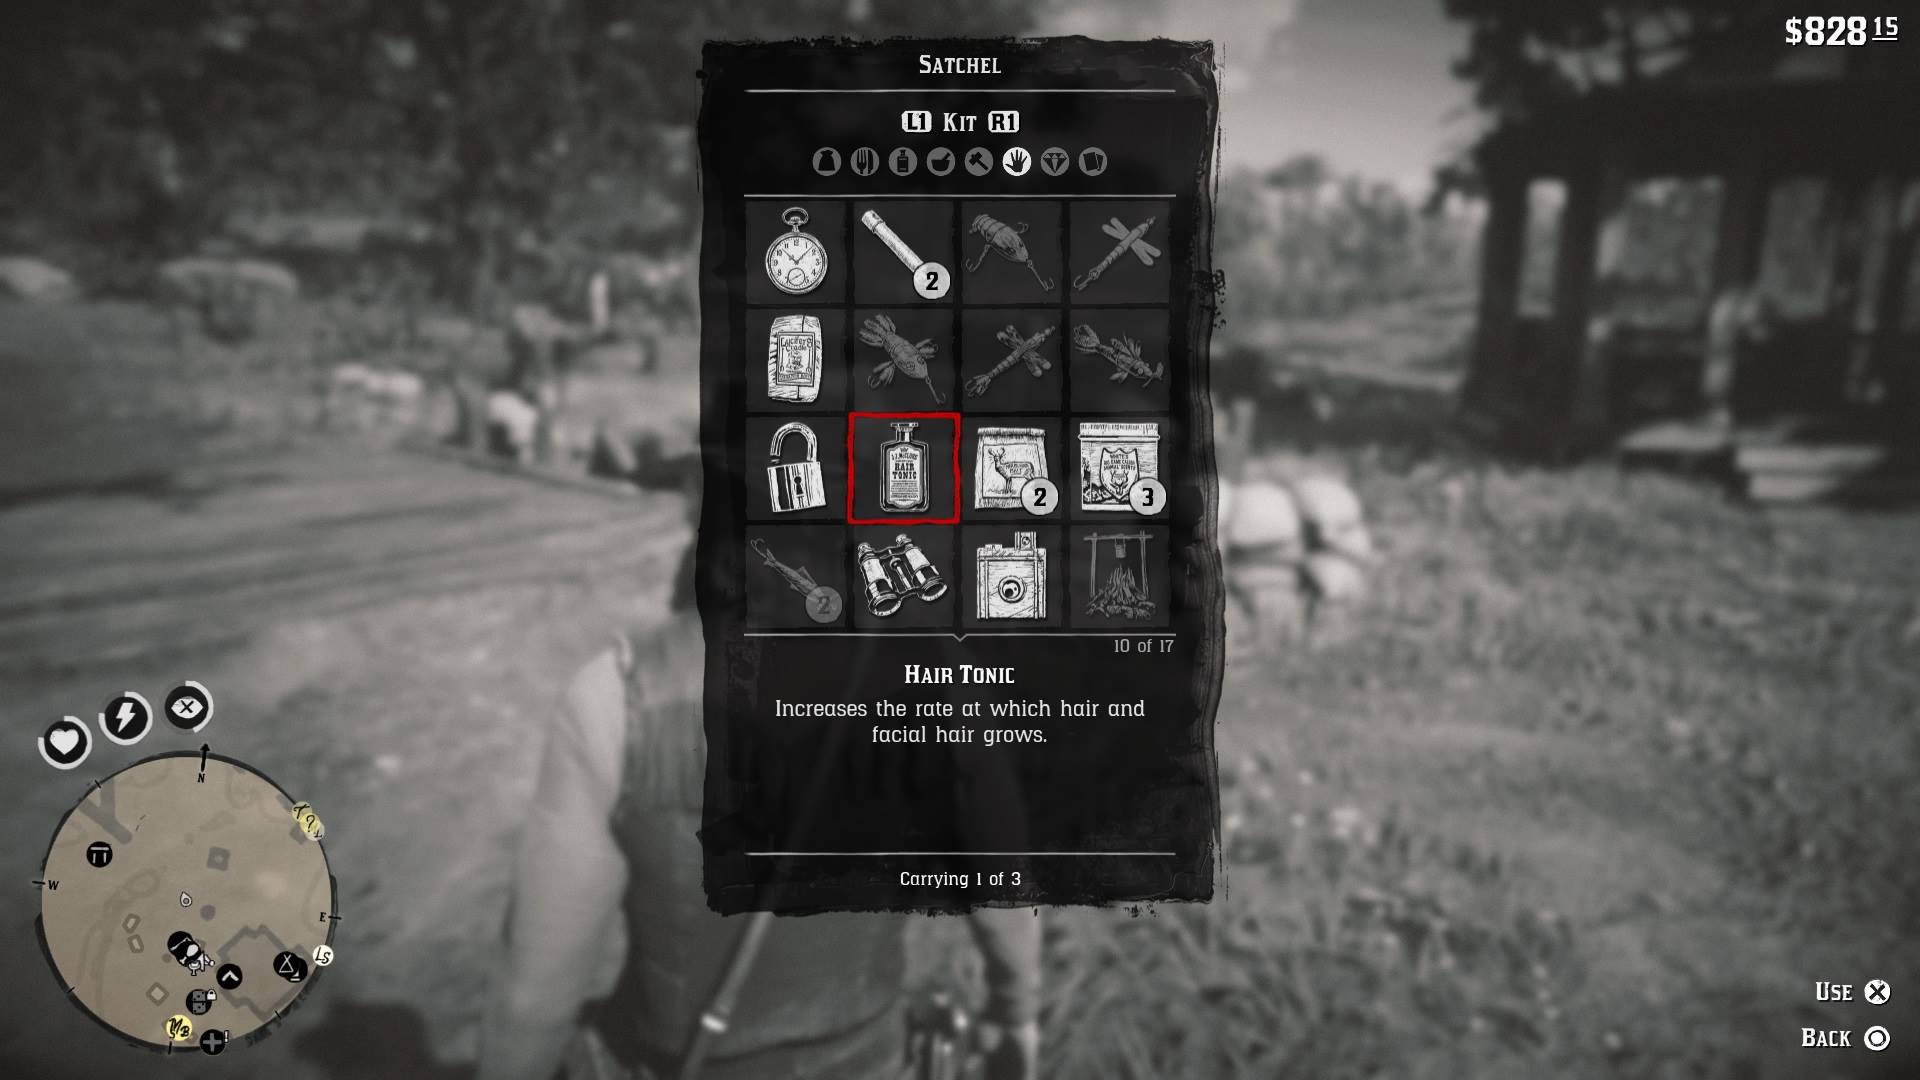 Red Dead Redemption 2: Hair Tonics are located in the Kit section of Arthur's satchel.